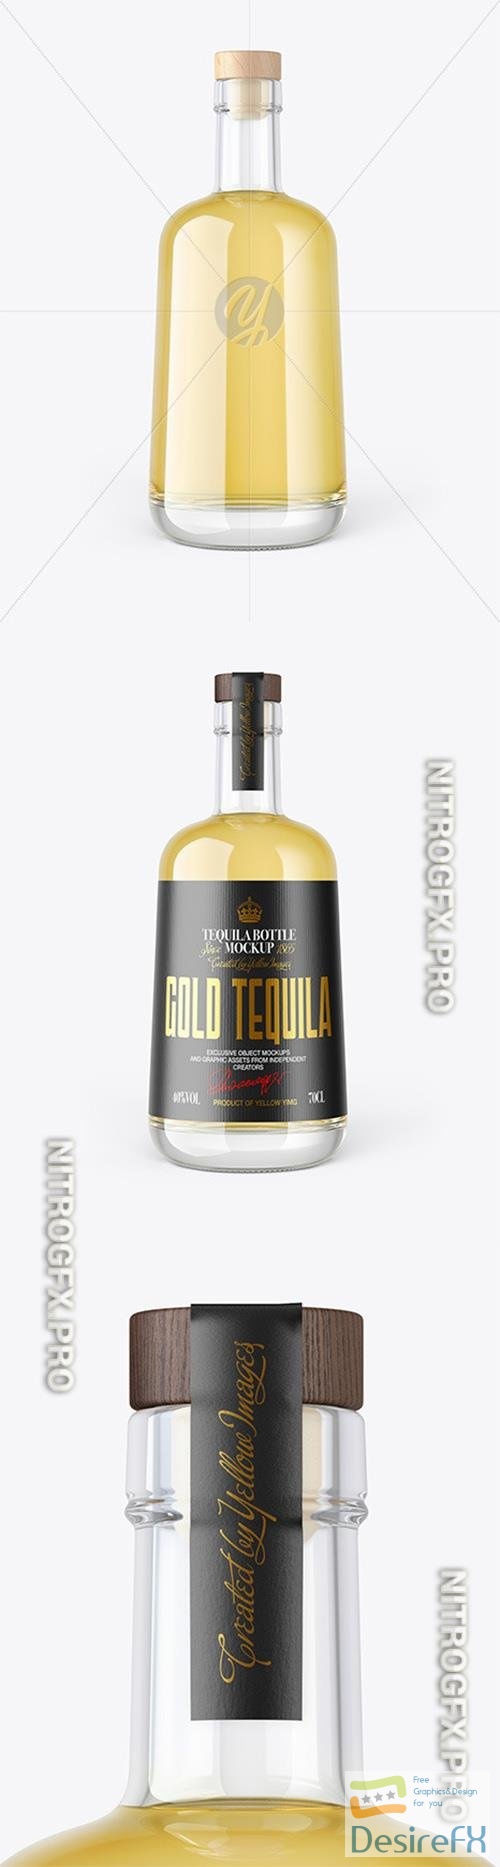 Gold Tequila Bottle with Wooden Cap Mockup 82695